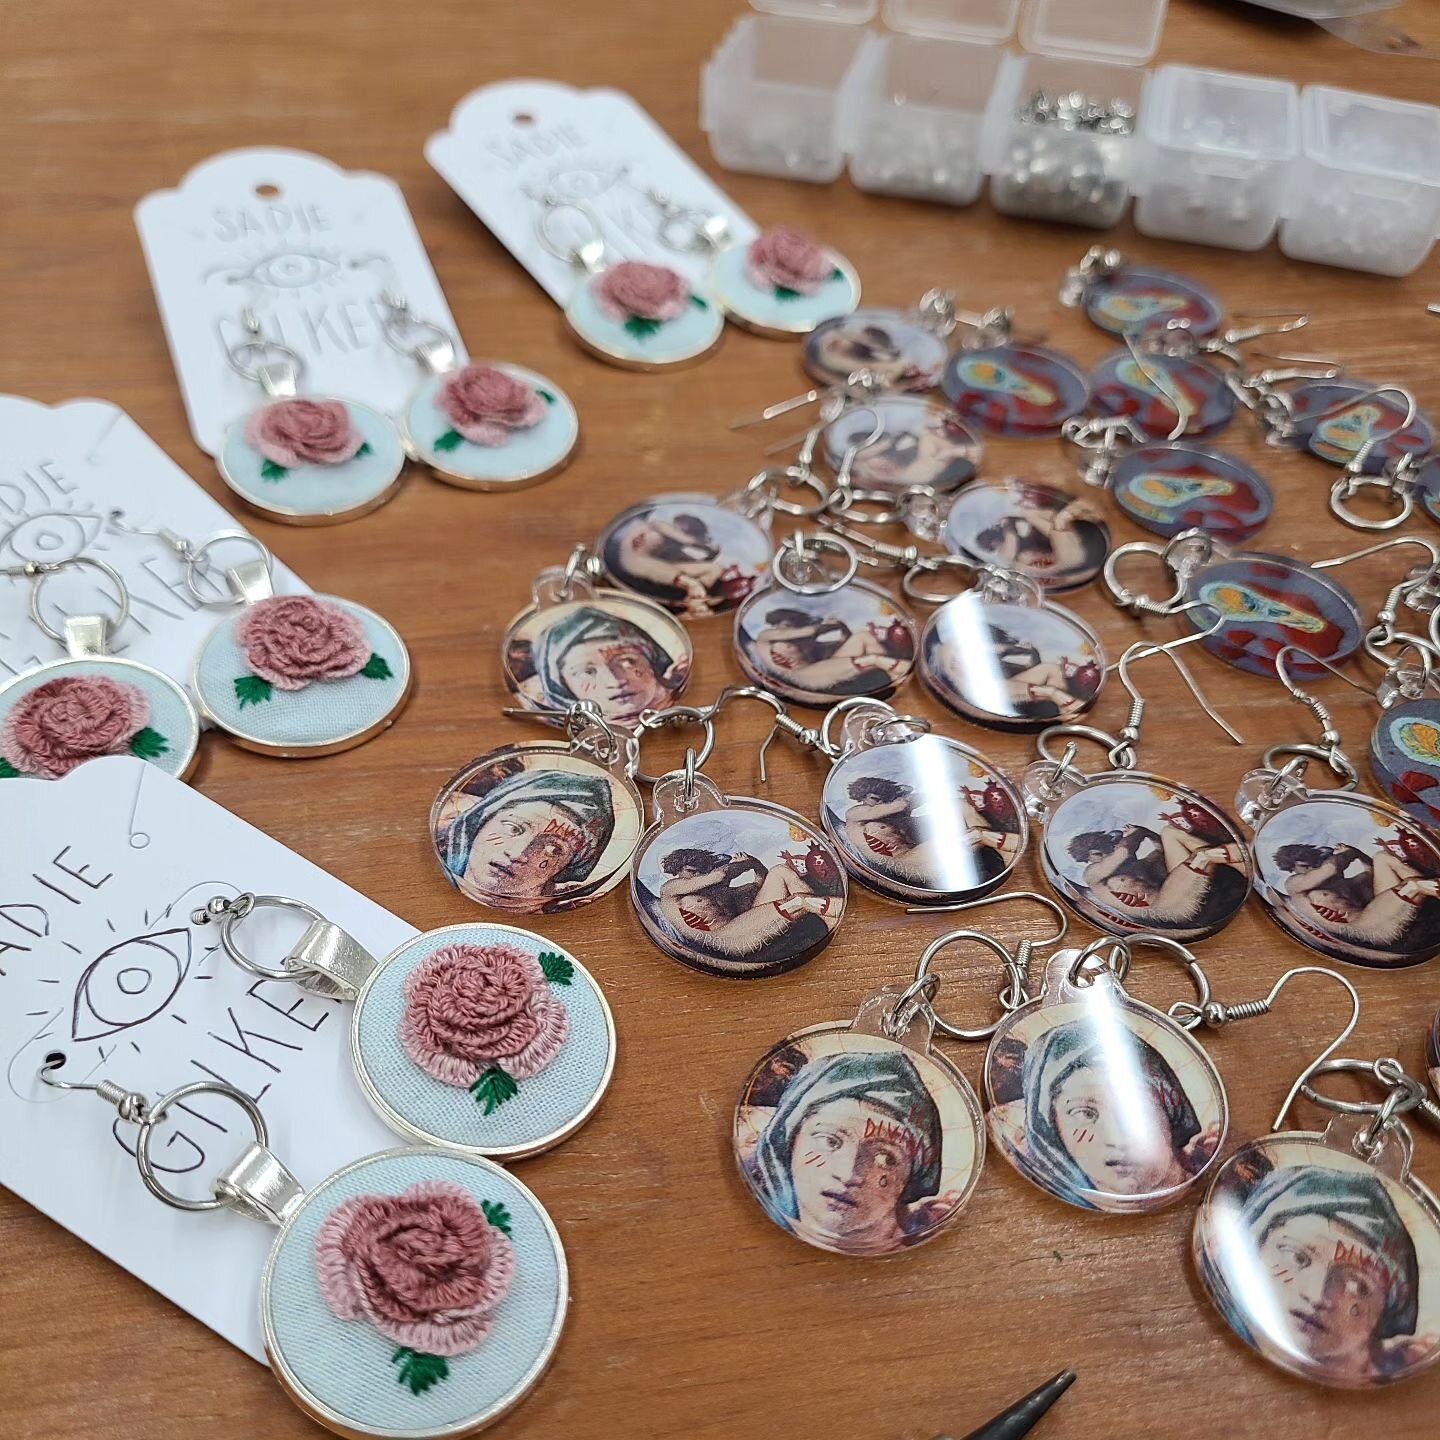 Good morning from the earring factory! Making some very special items for December 16 at Slice of Life :)